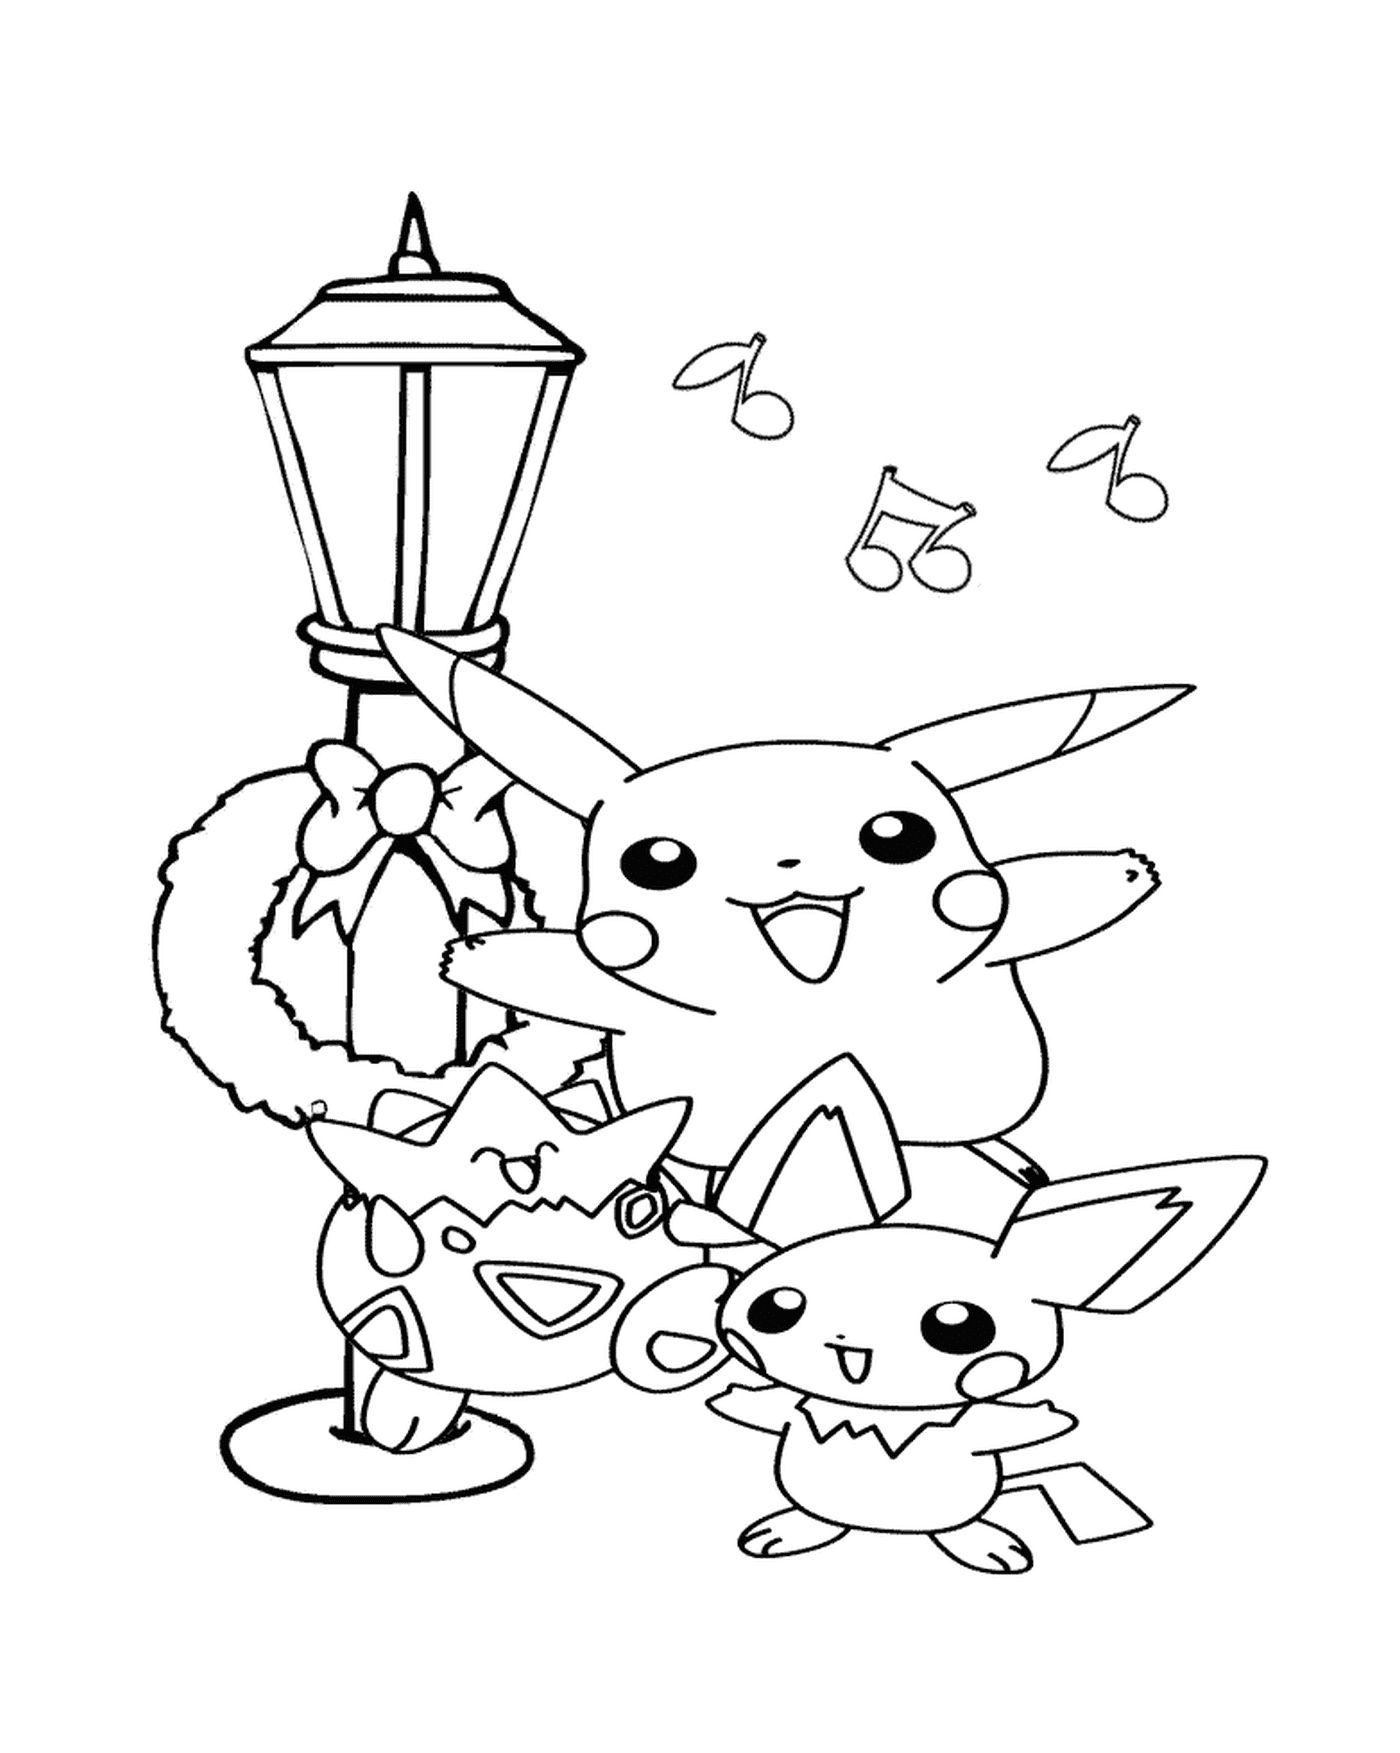 pikachu and friends singing coloring page